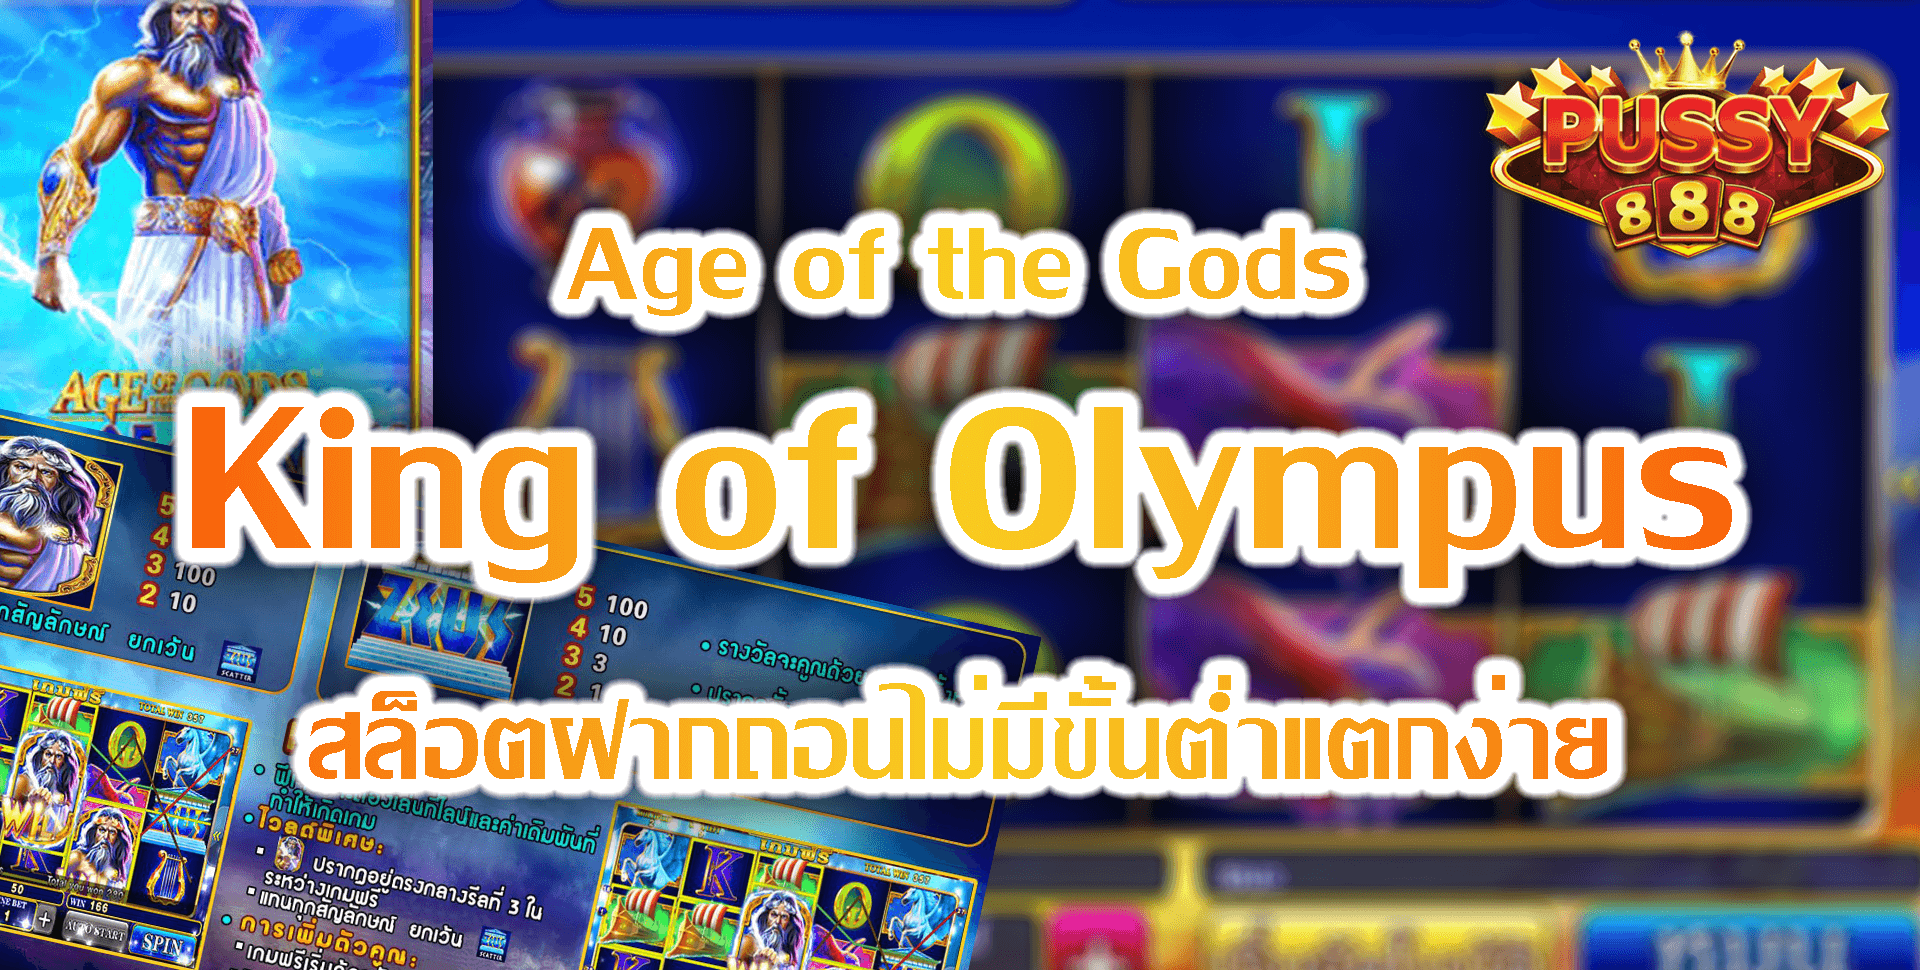 Pussy888-Age of the Gods King of Olympus-puss888-5